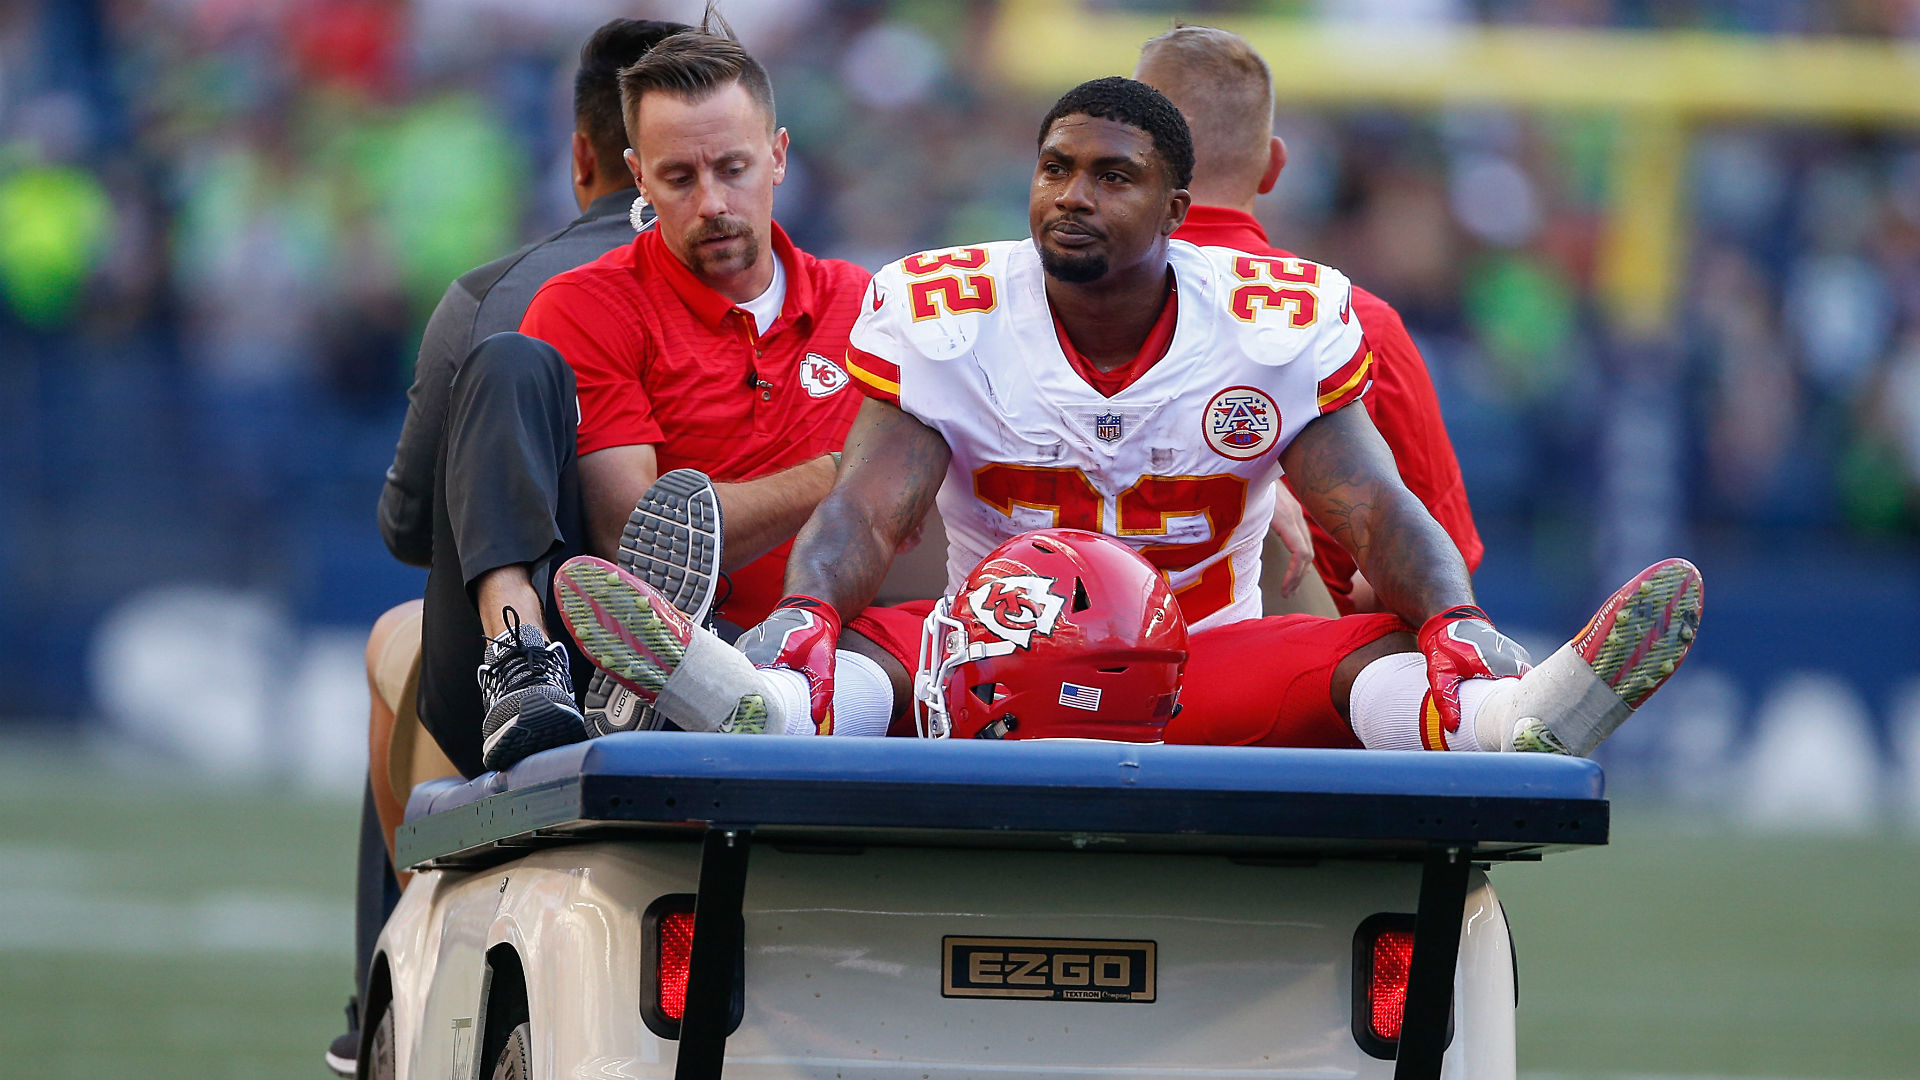 Chiefs starting RB Spencer Ware sprains right knee